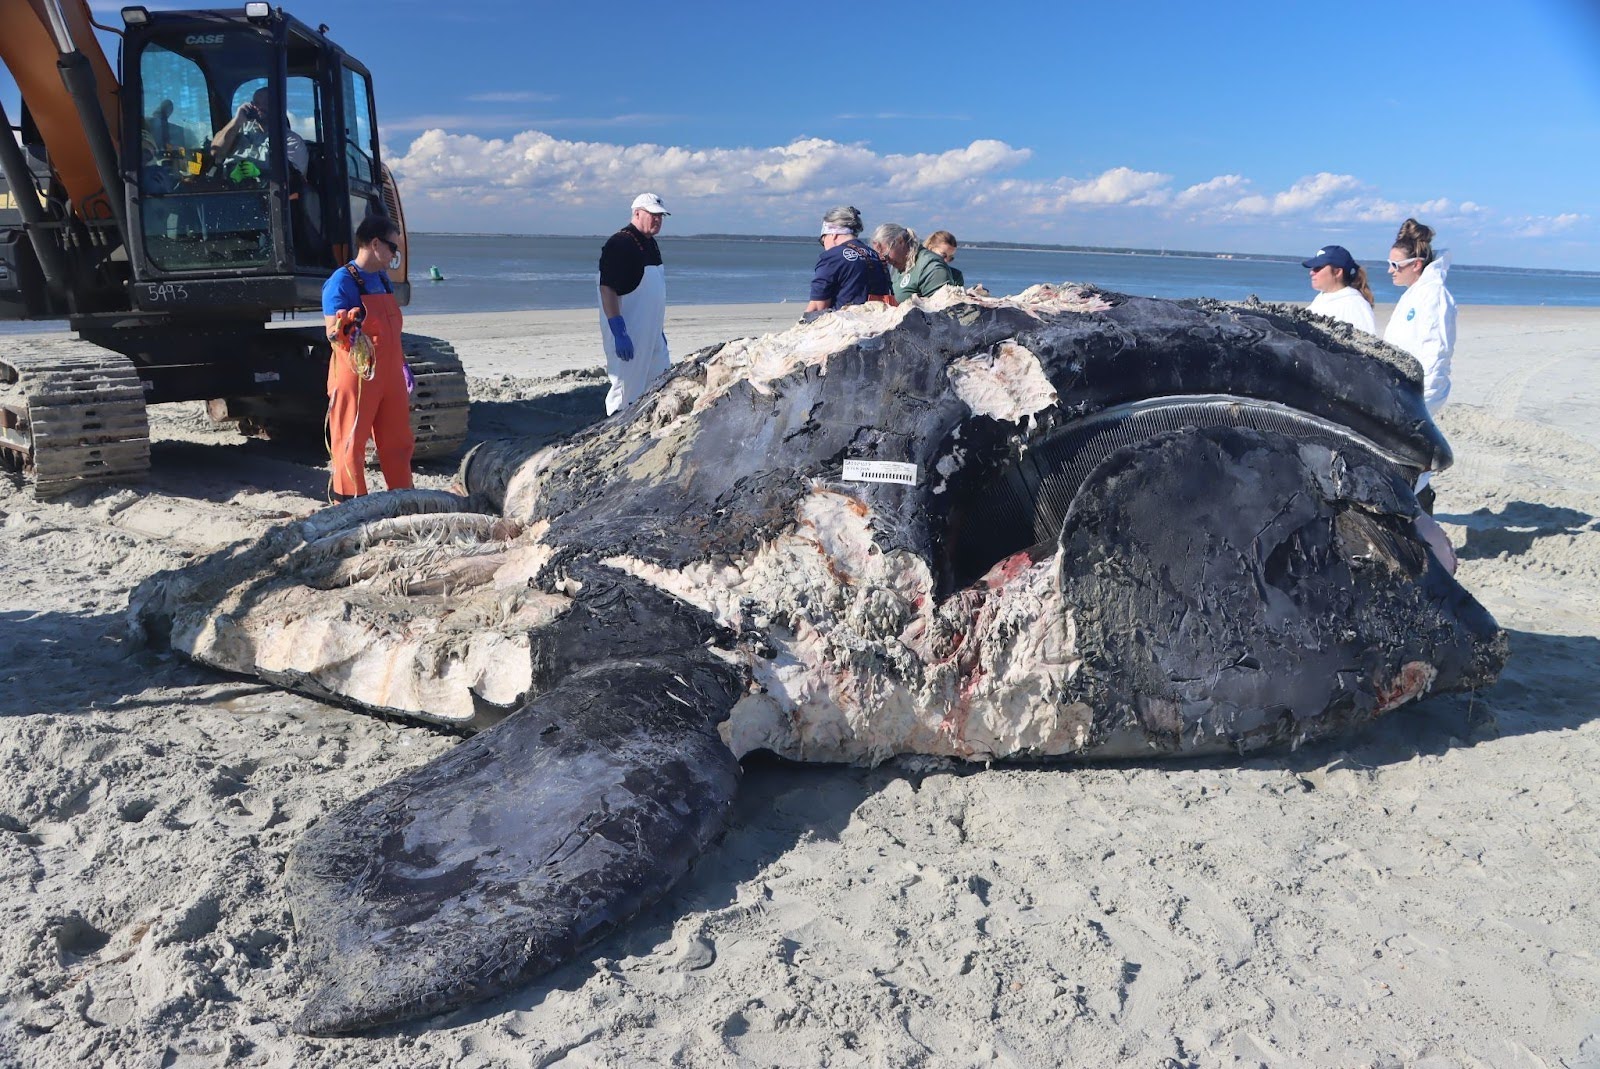 a dead decaying whale carcass on a beach with people lingering around